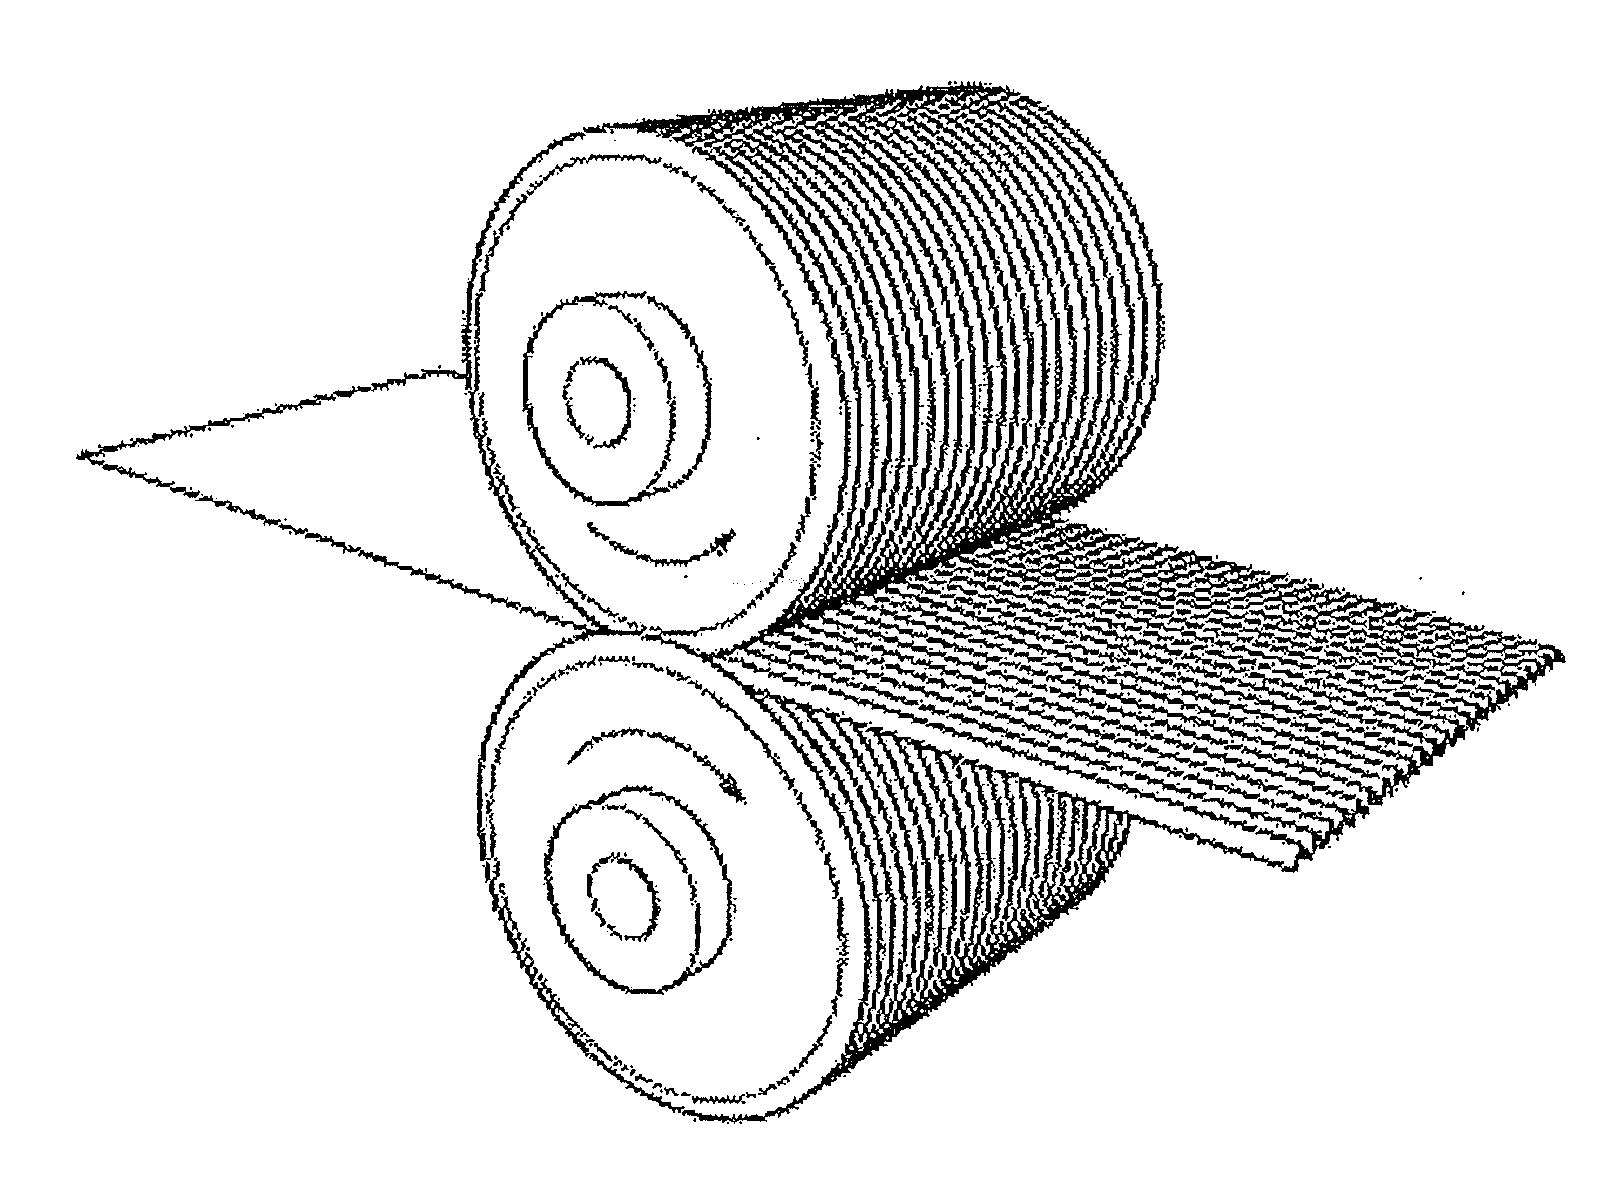 Mixed fiber spunbonded nonwoven fabric, and method for production and use thereof